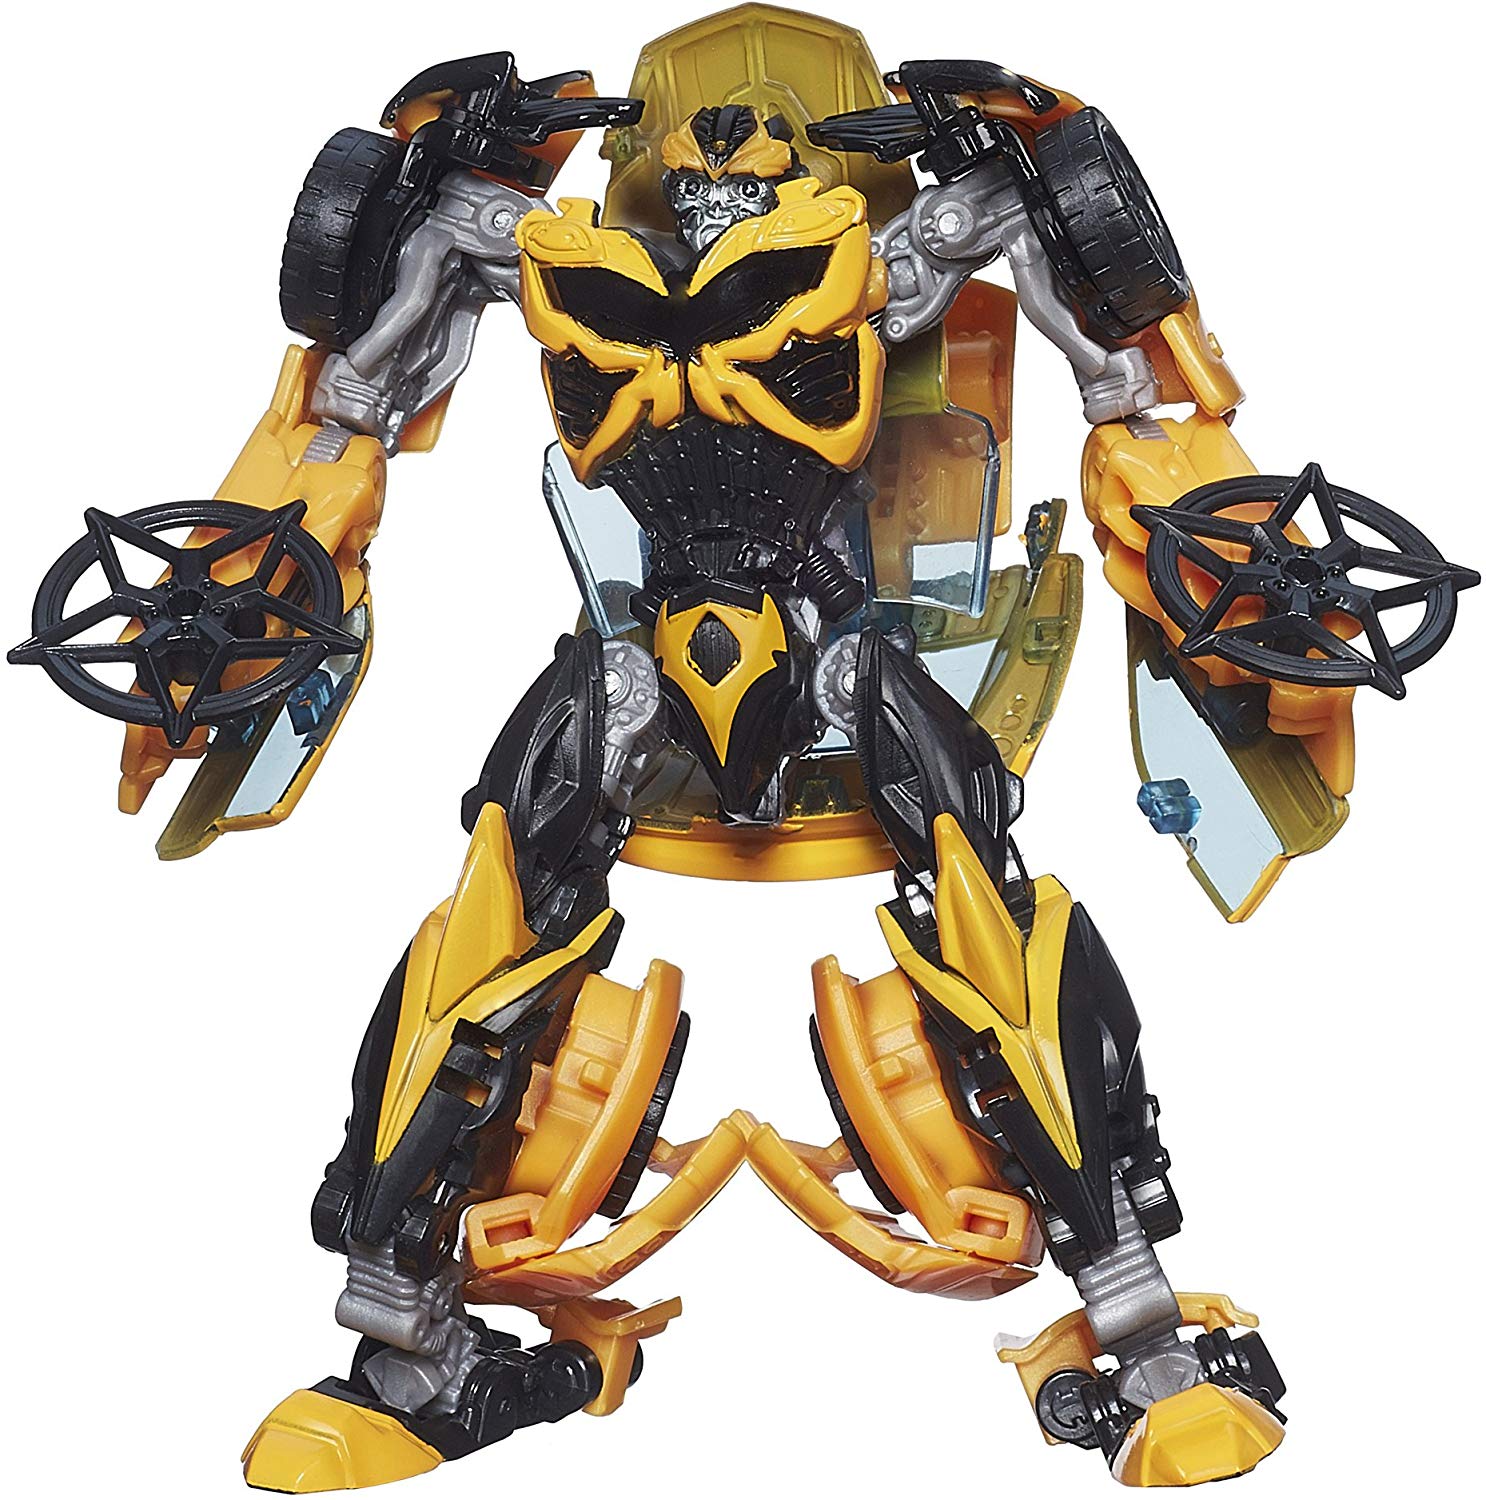 Transformers 4 Generations Age of Extinction Bumblebee Action Figure 2